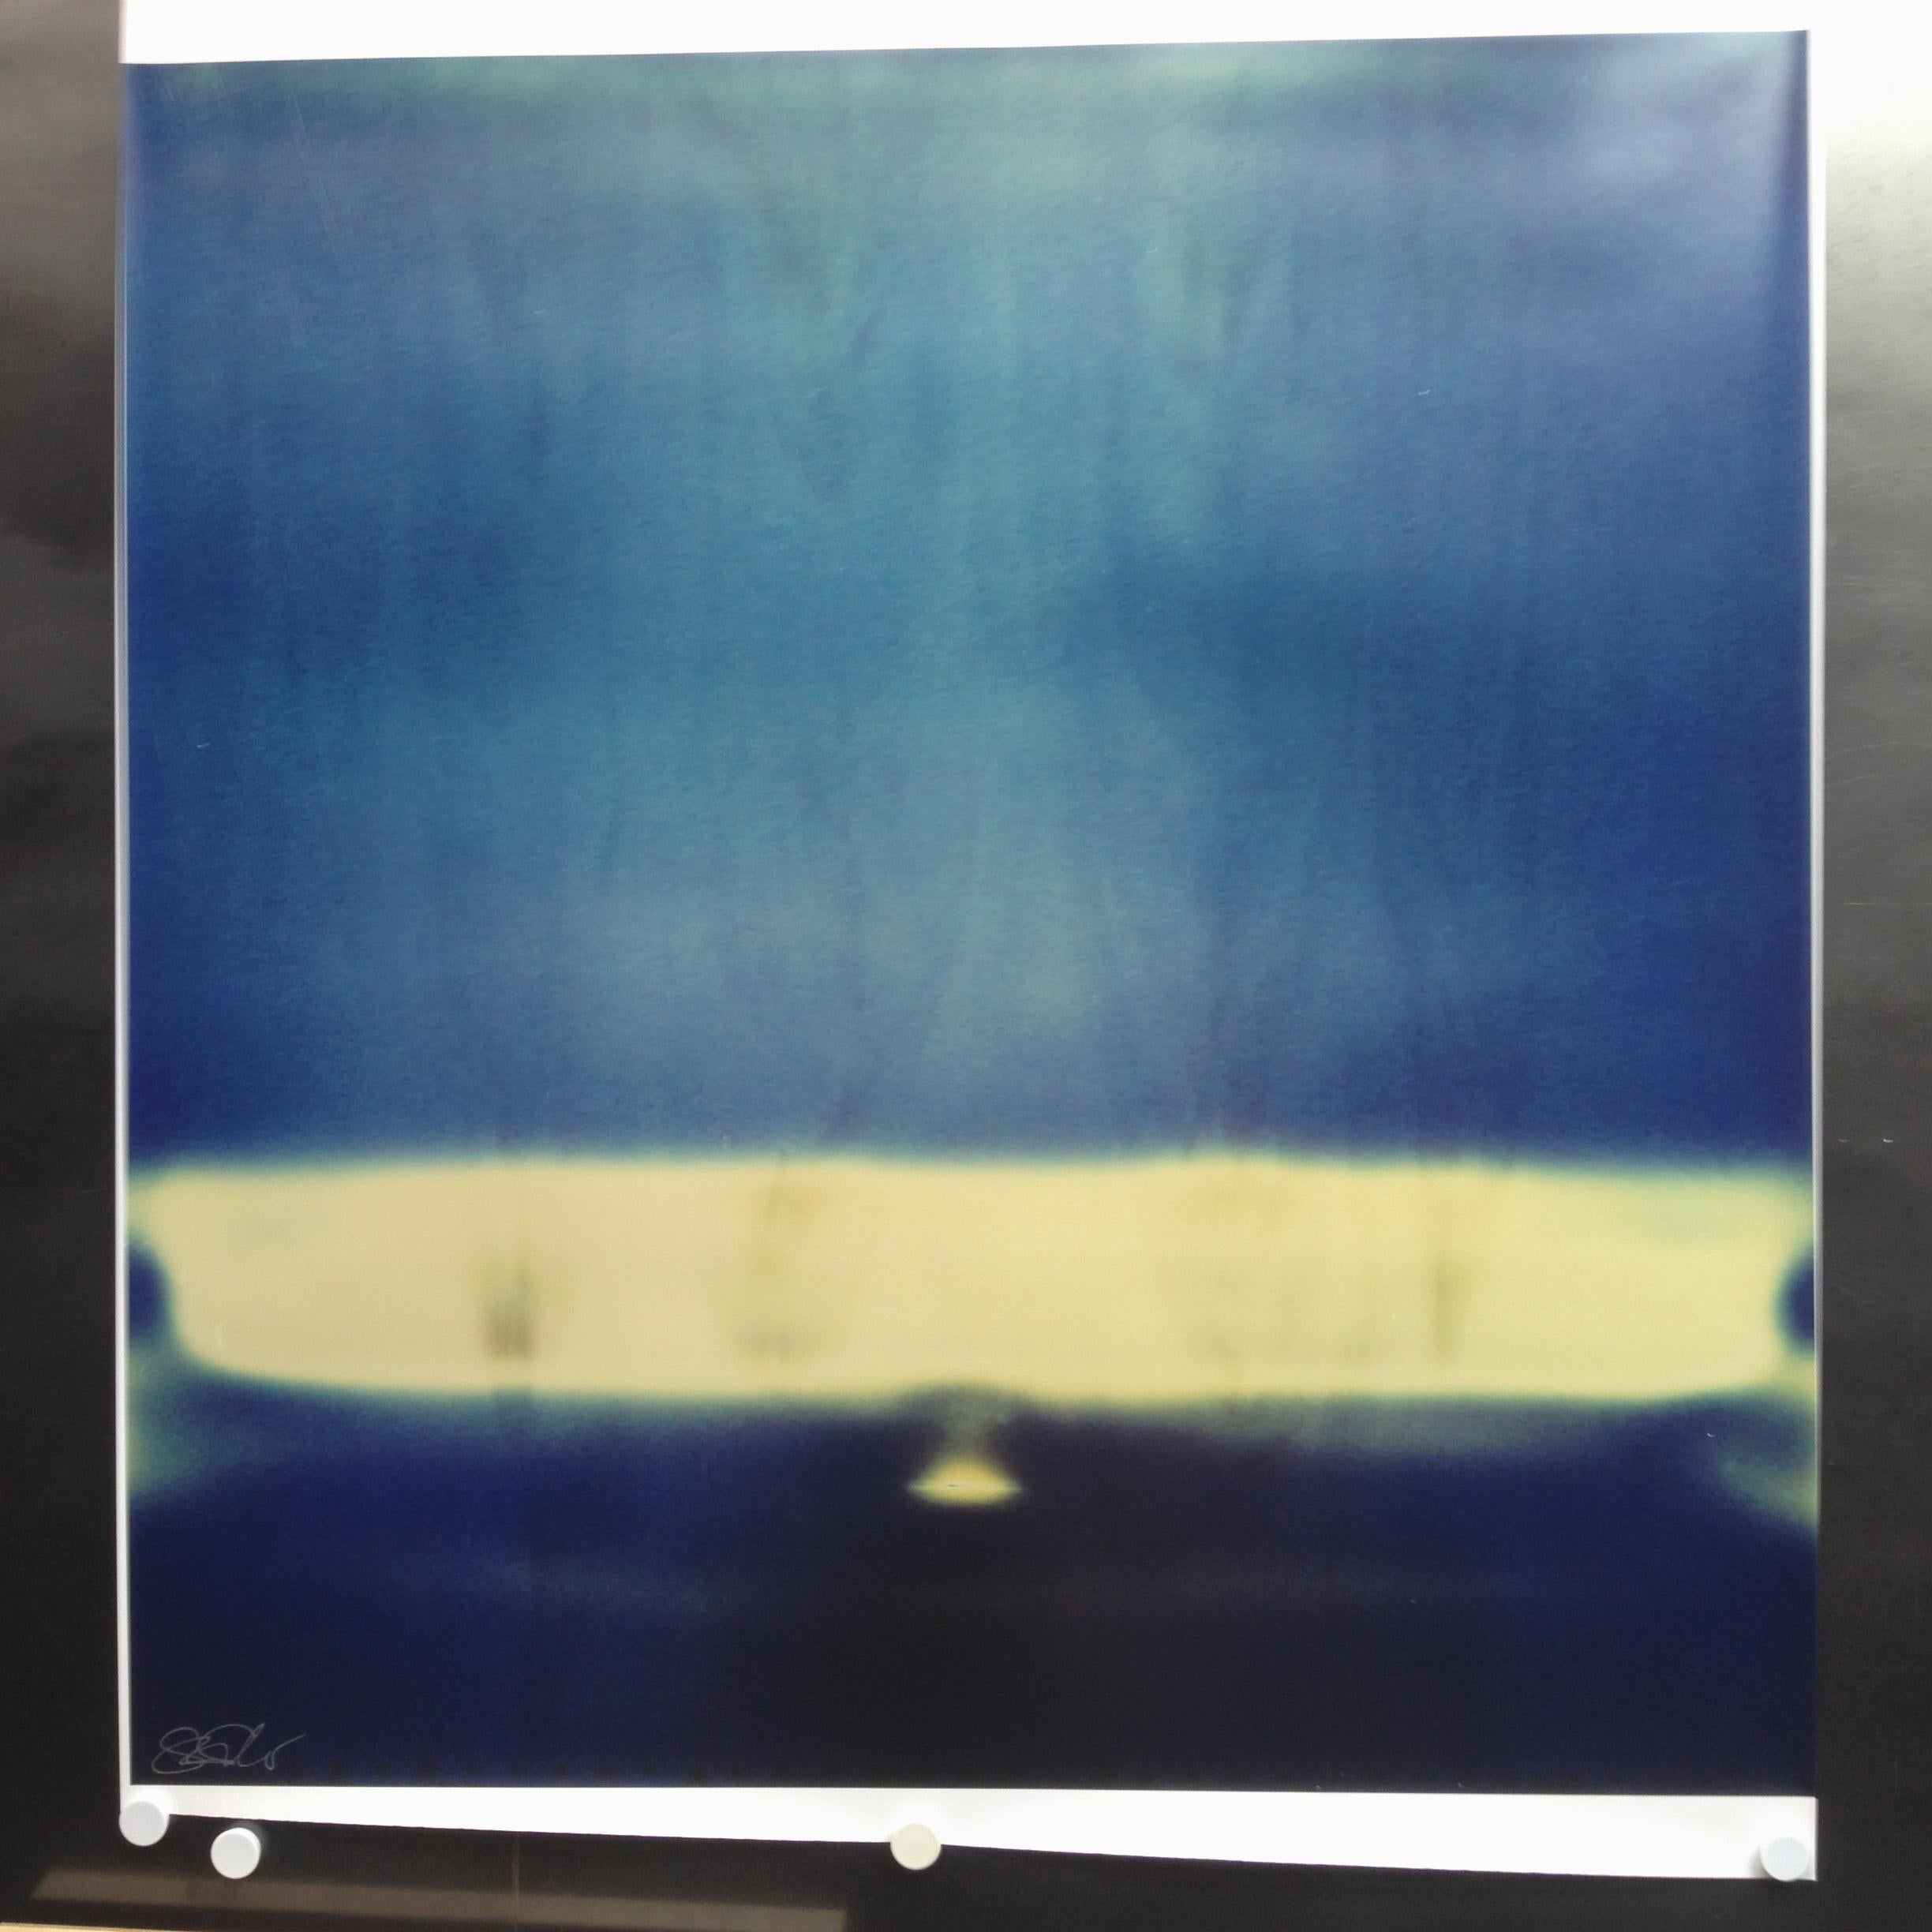 Stefanie Schneider Landscape Photograph - Dreamscape (Wastelands) - Proofs before Printing - only one available